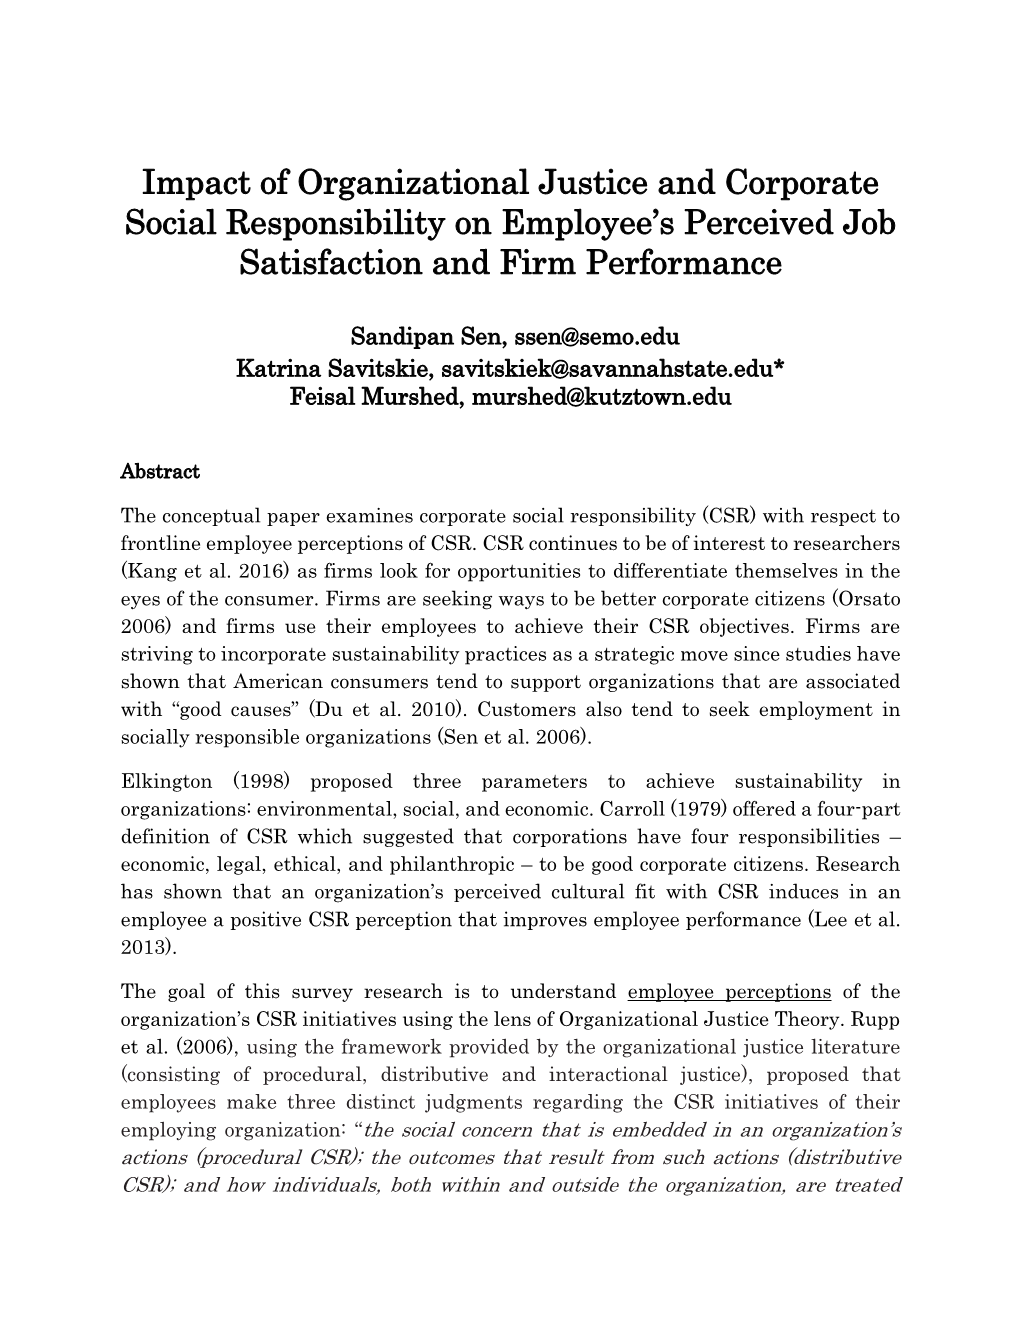 Impact of Organizational Justice and Corporate Social Responsibility on Employee’S Perceived Job Satisfaction and Firm Performance